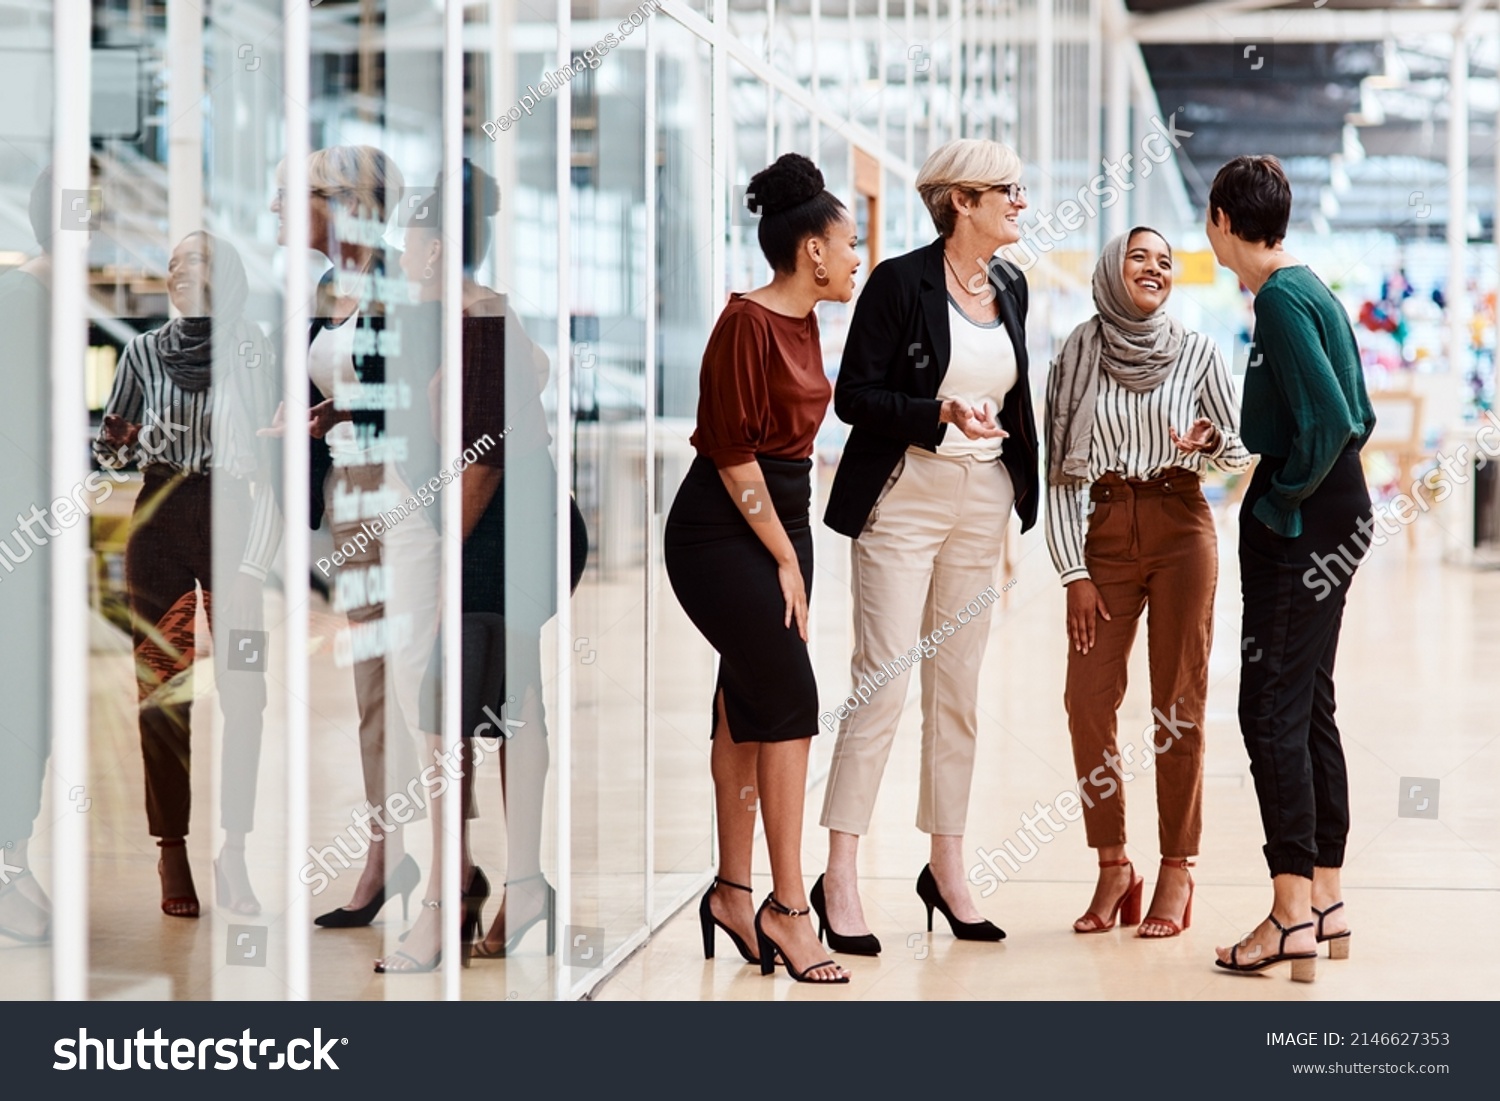 They share a solid friendship as colleagues. Shot of a group of businesswomen chatting to each other in an office. #2146627353